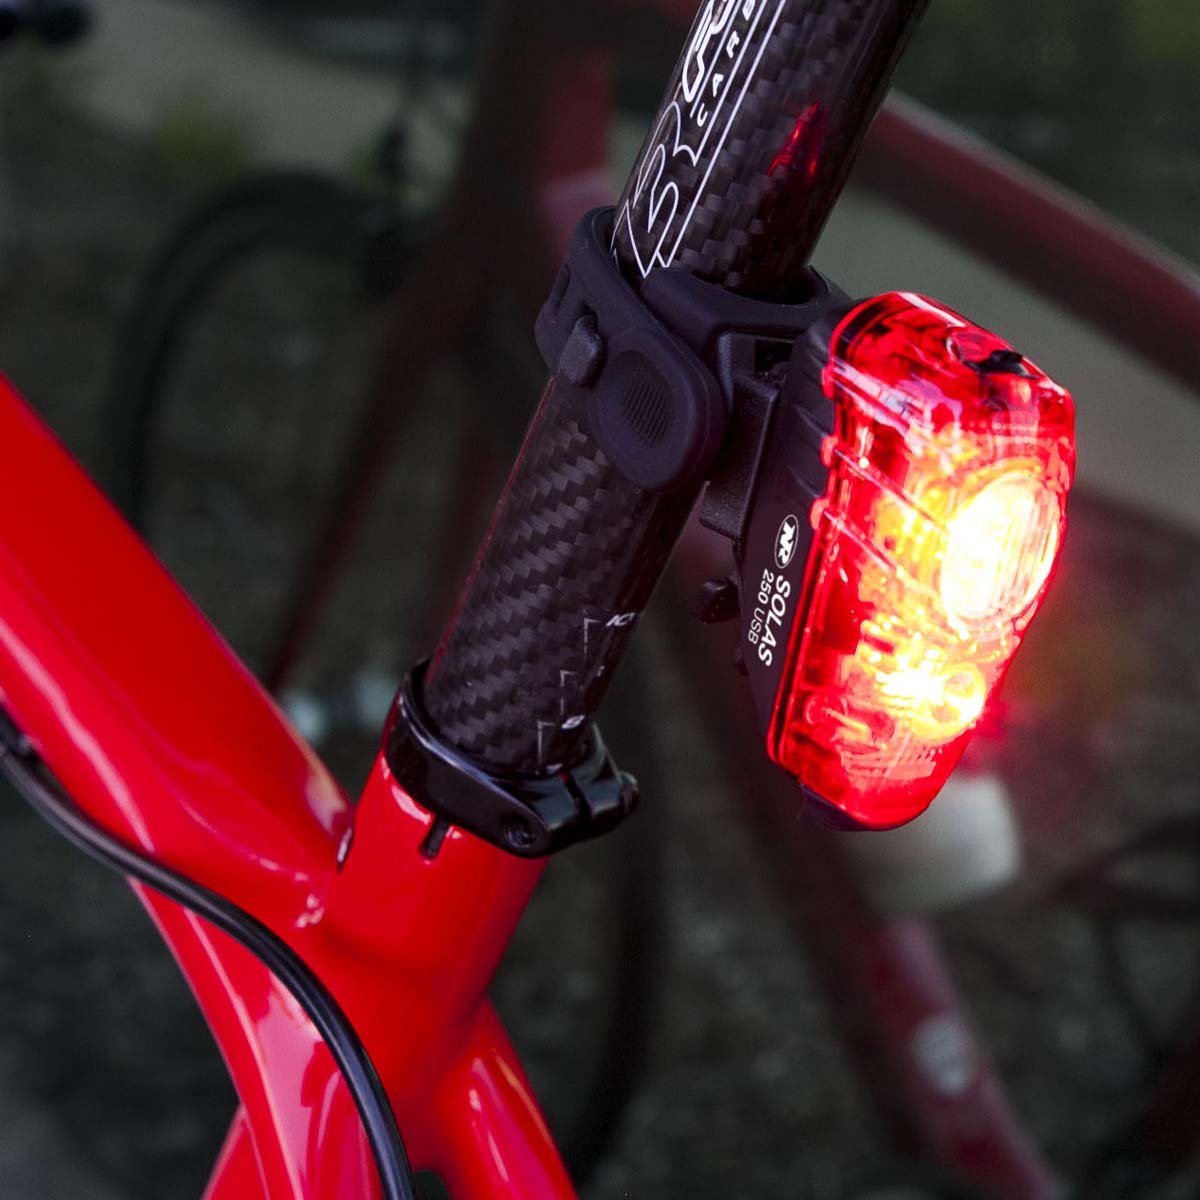 cycle tail light